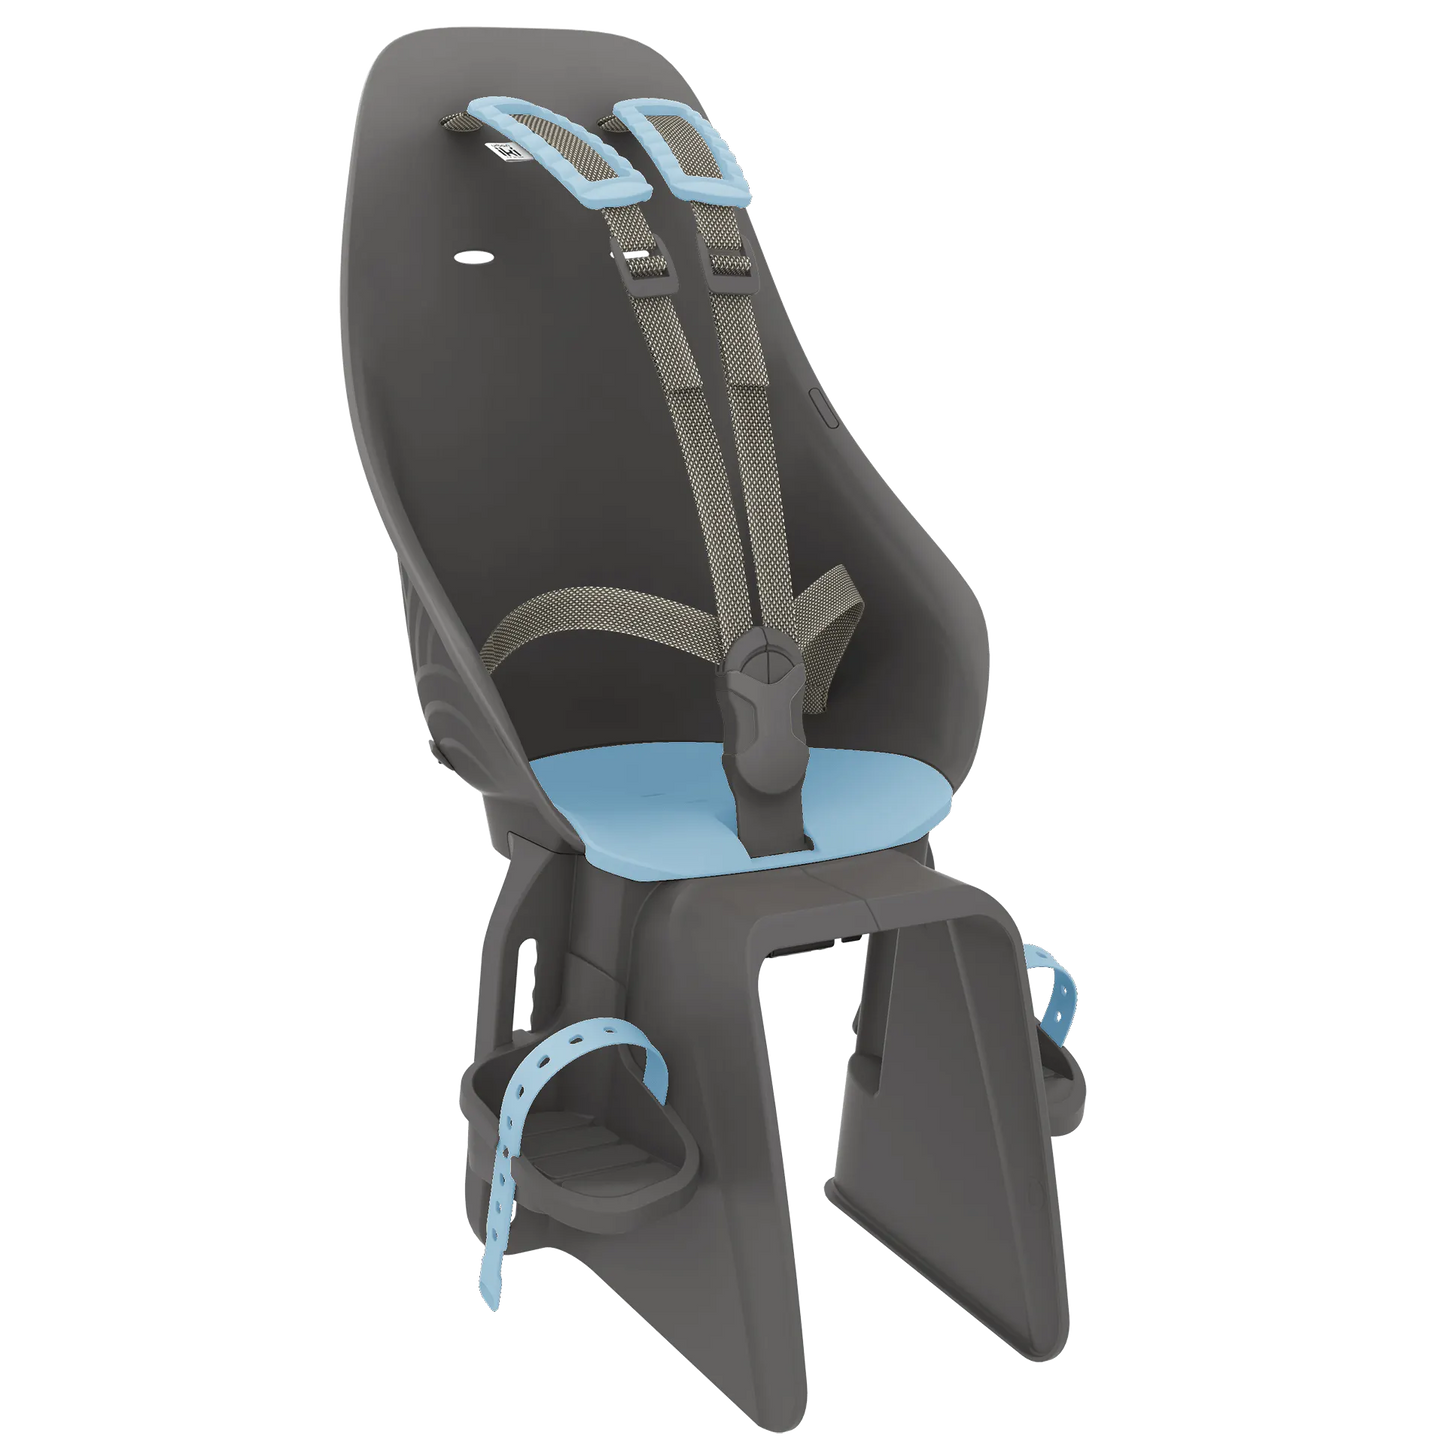 Child Seat Rental and Helmet (Tax Included)-Townsend